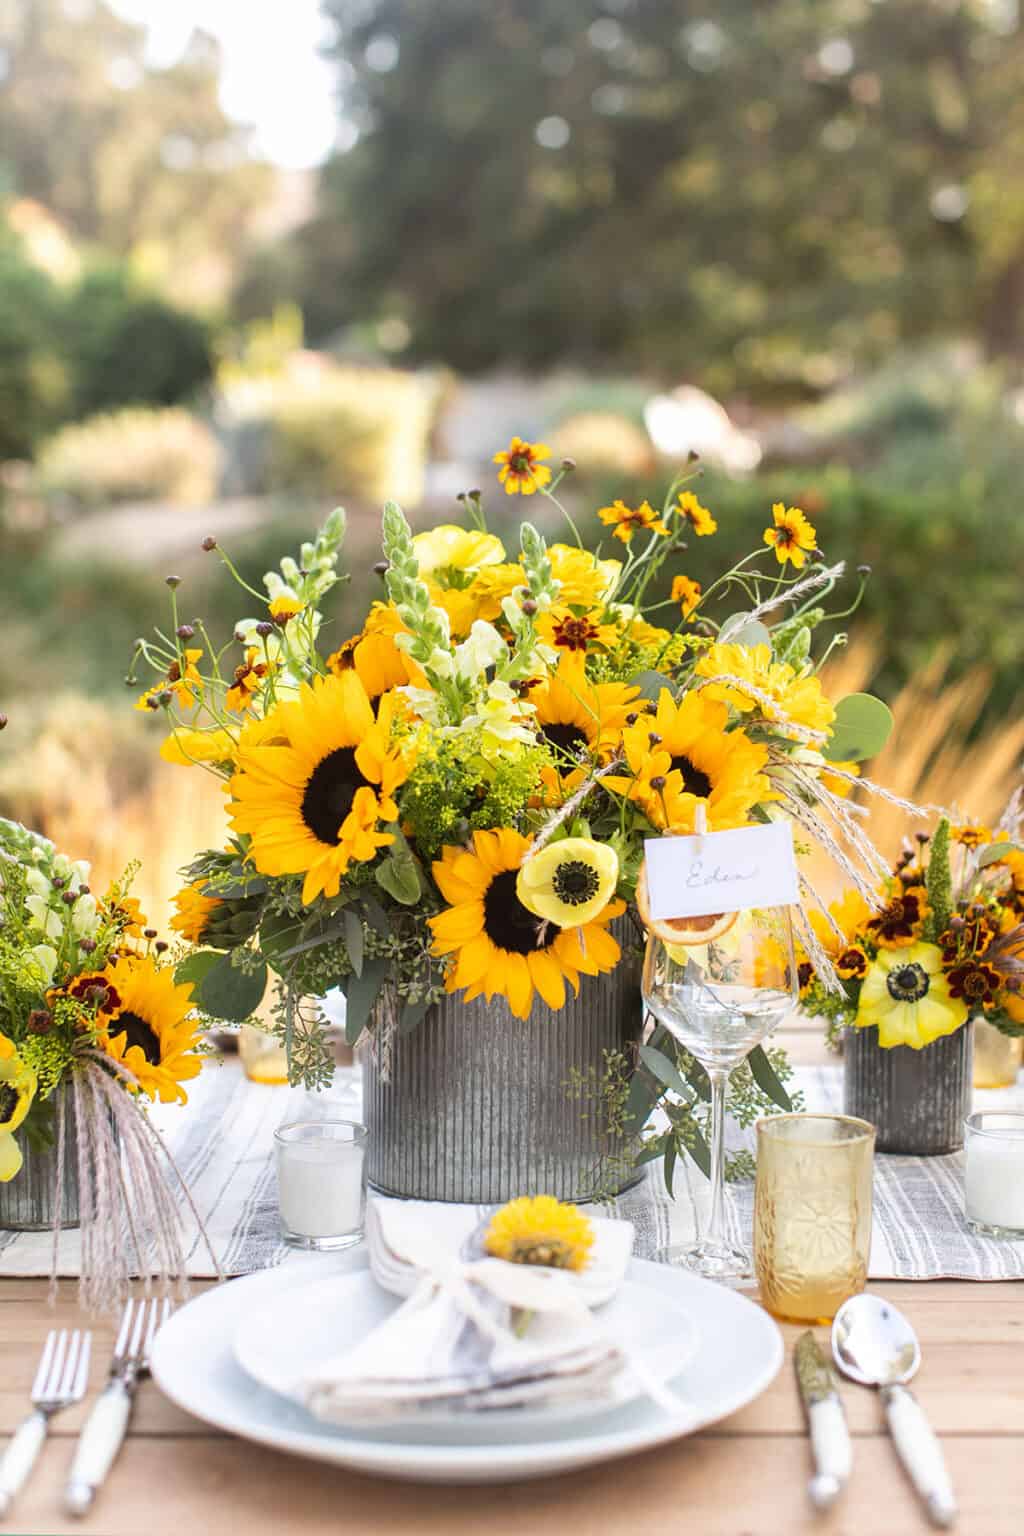 How to Host the Best Fall Harvest Party - Sugar and Charm